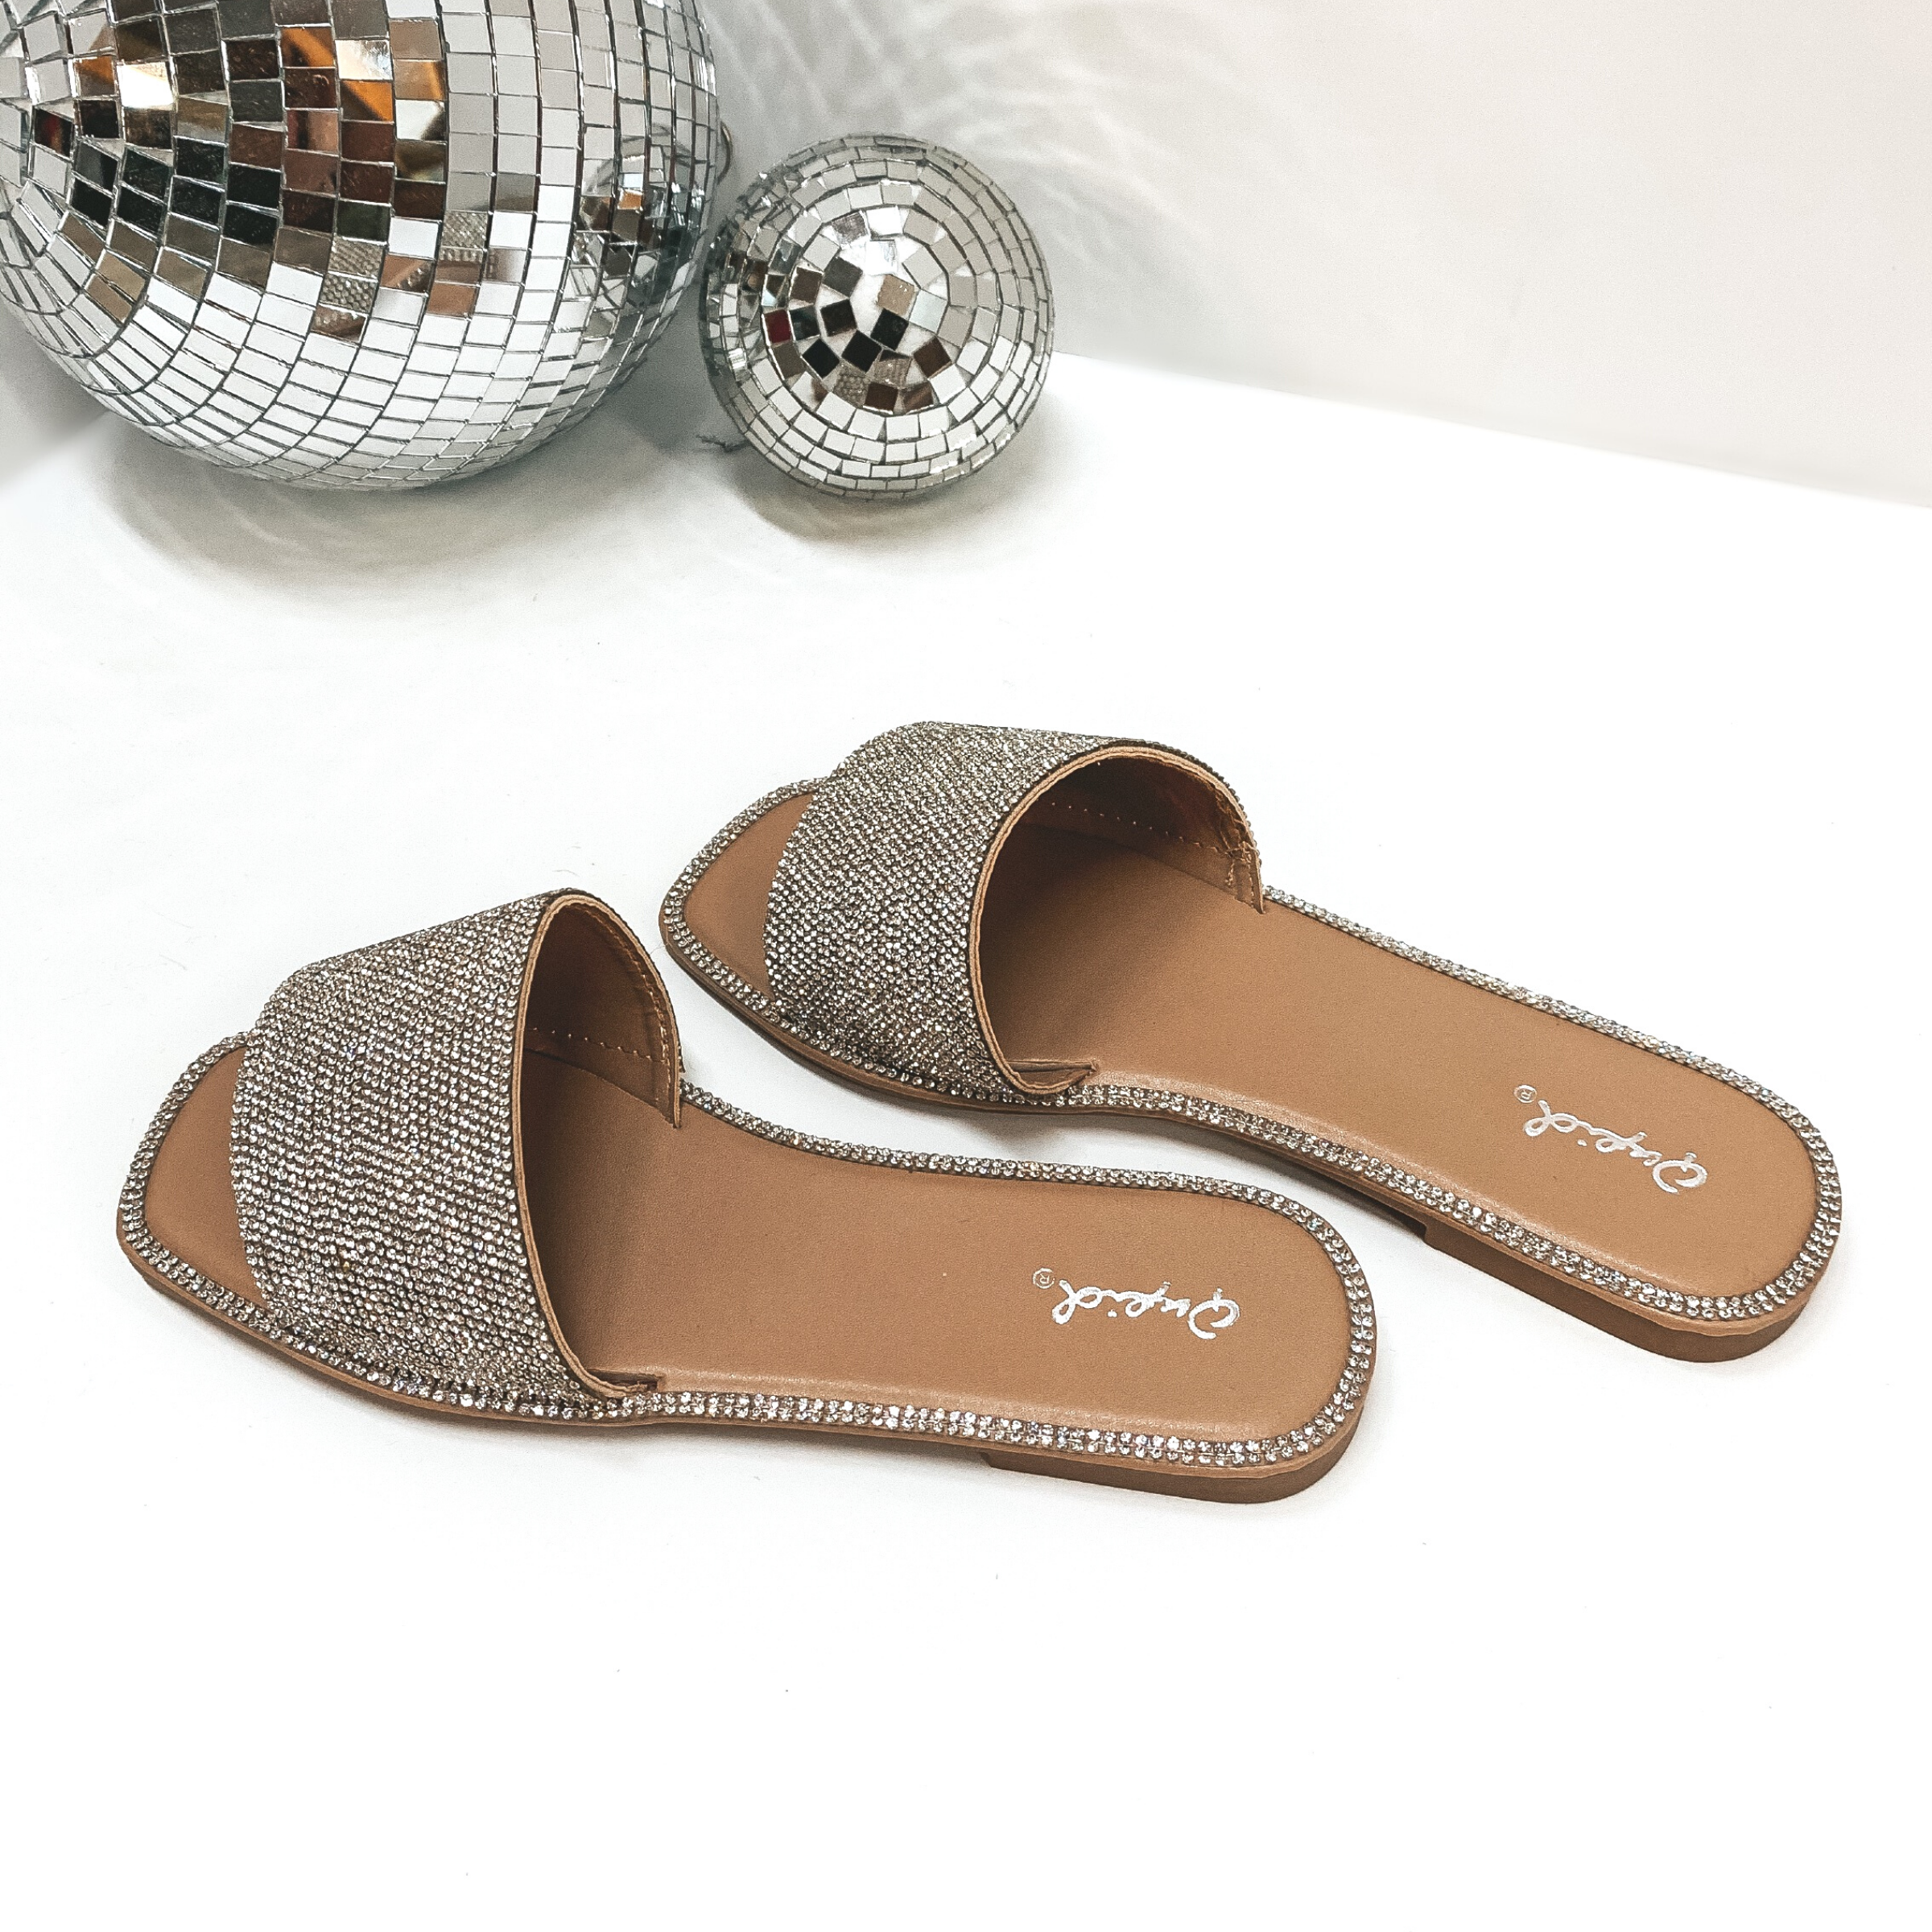 Twinkle and Shine Crystal Slide On Sandals with Crystal Trim Sole - Giddy Up Glamour Boutique